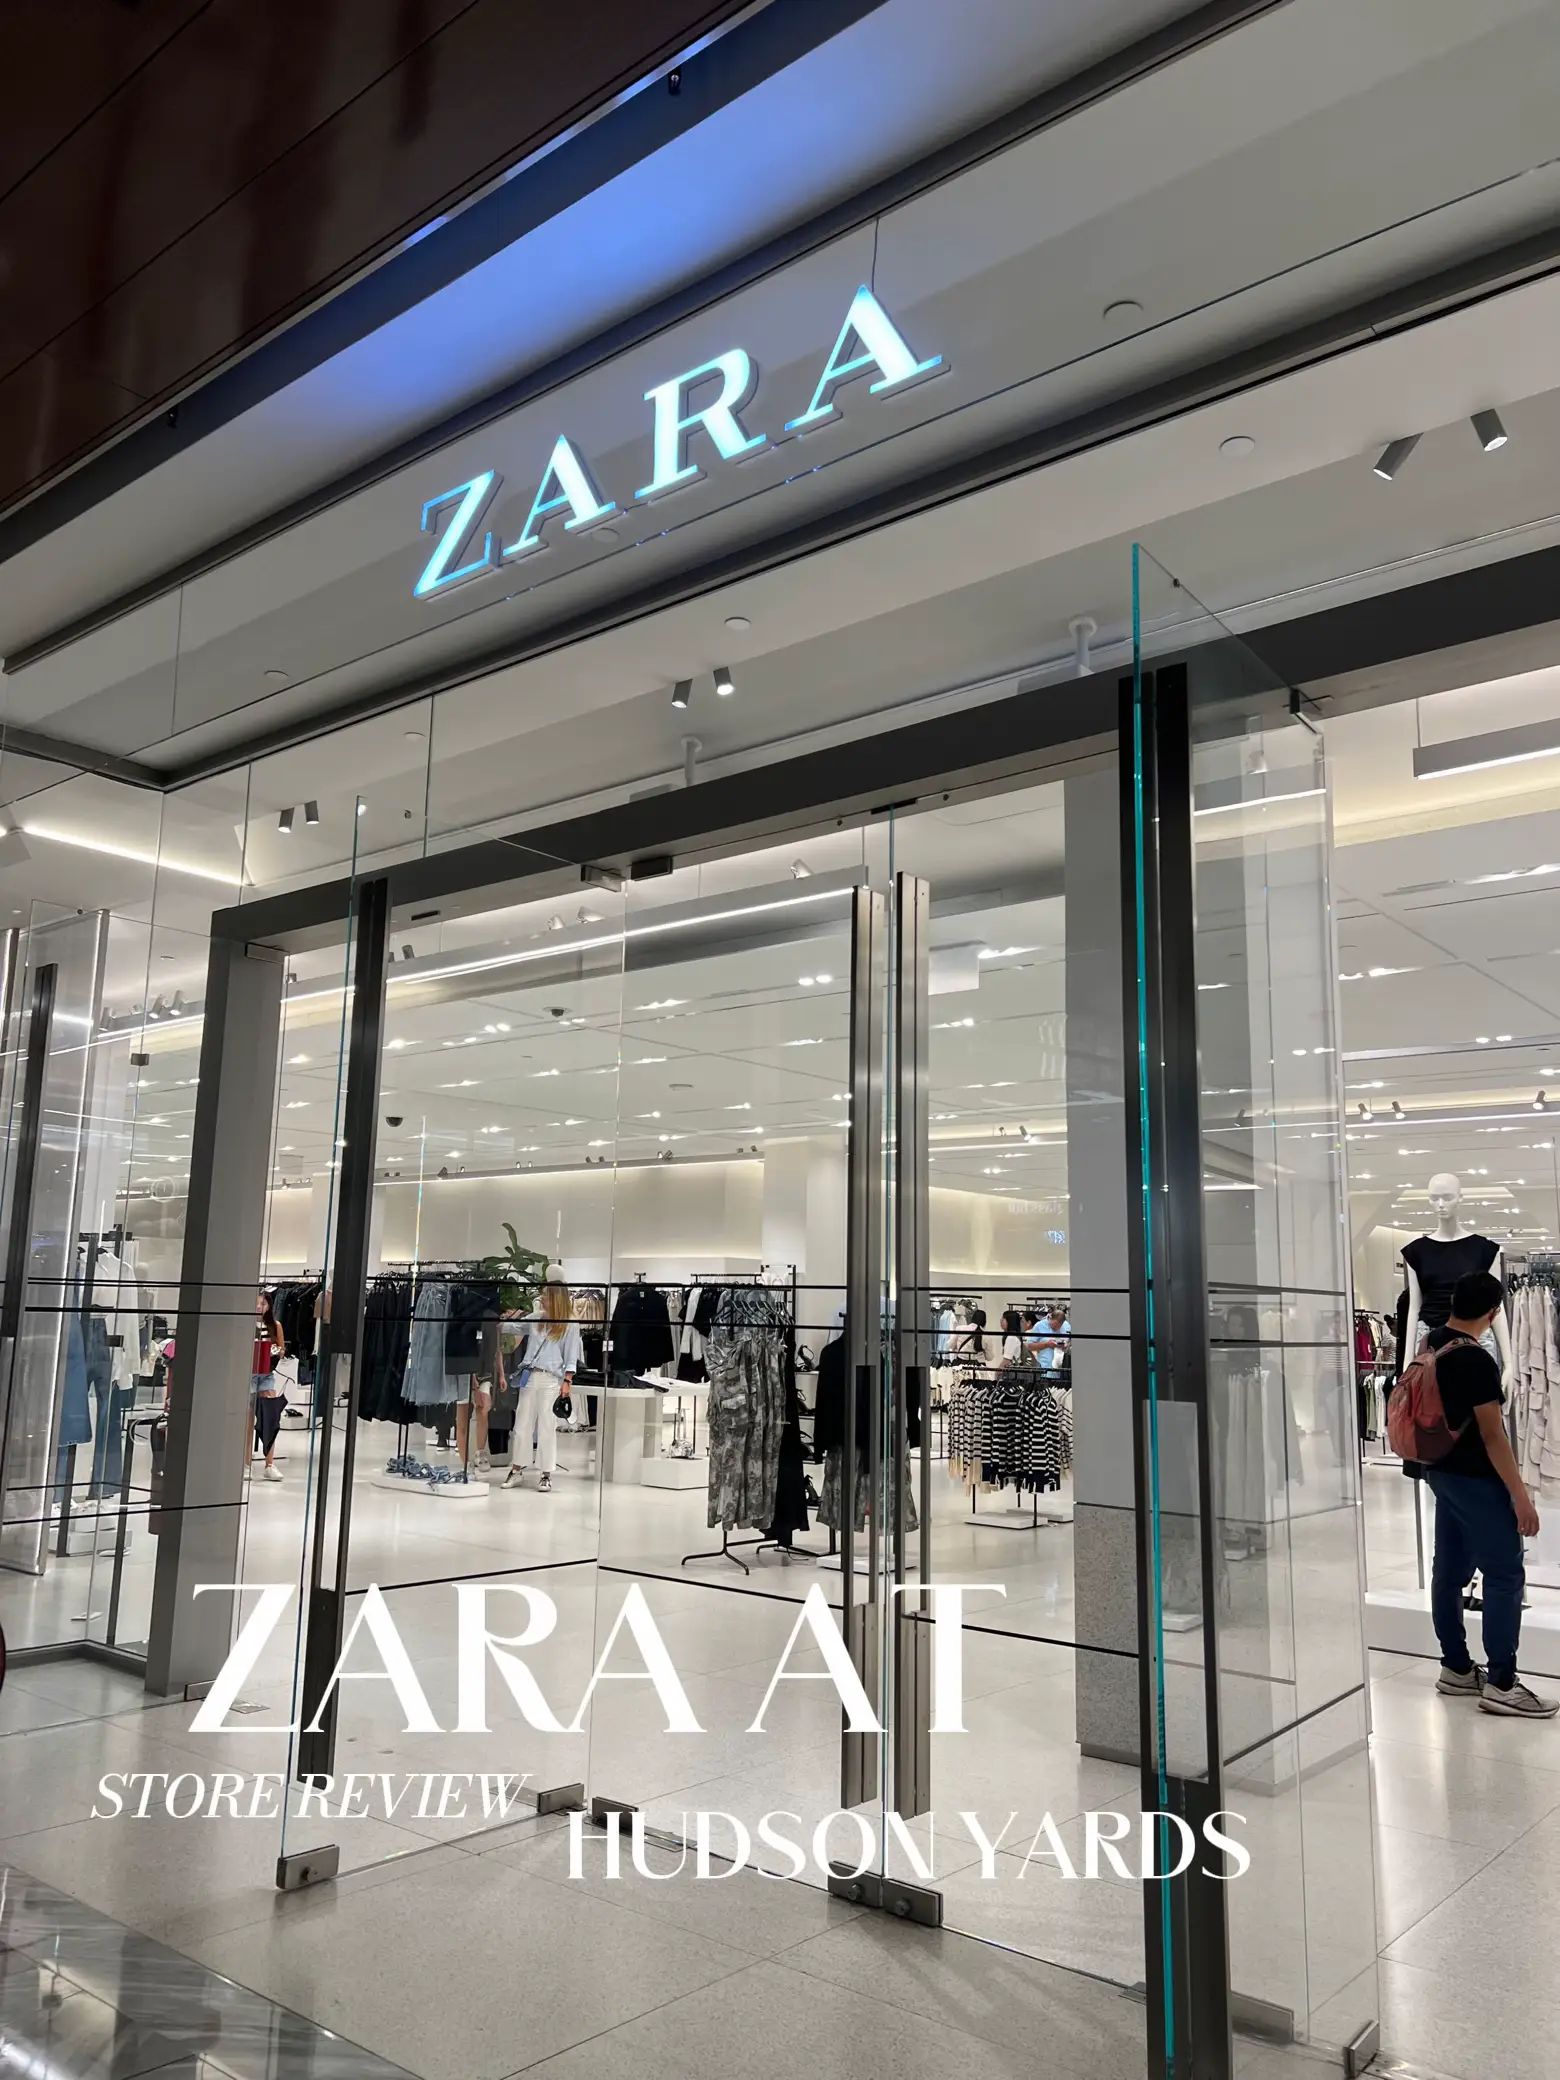 Zara 5th Avenue New York - Accessories and Clothing Store